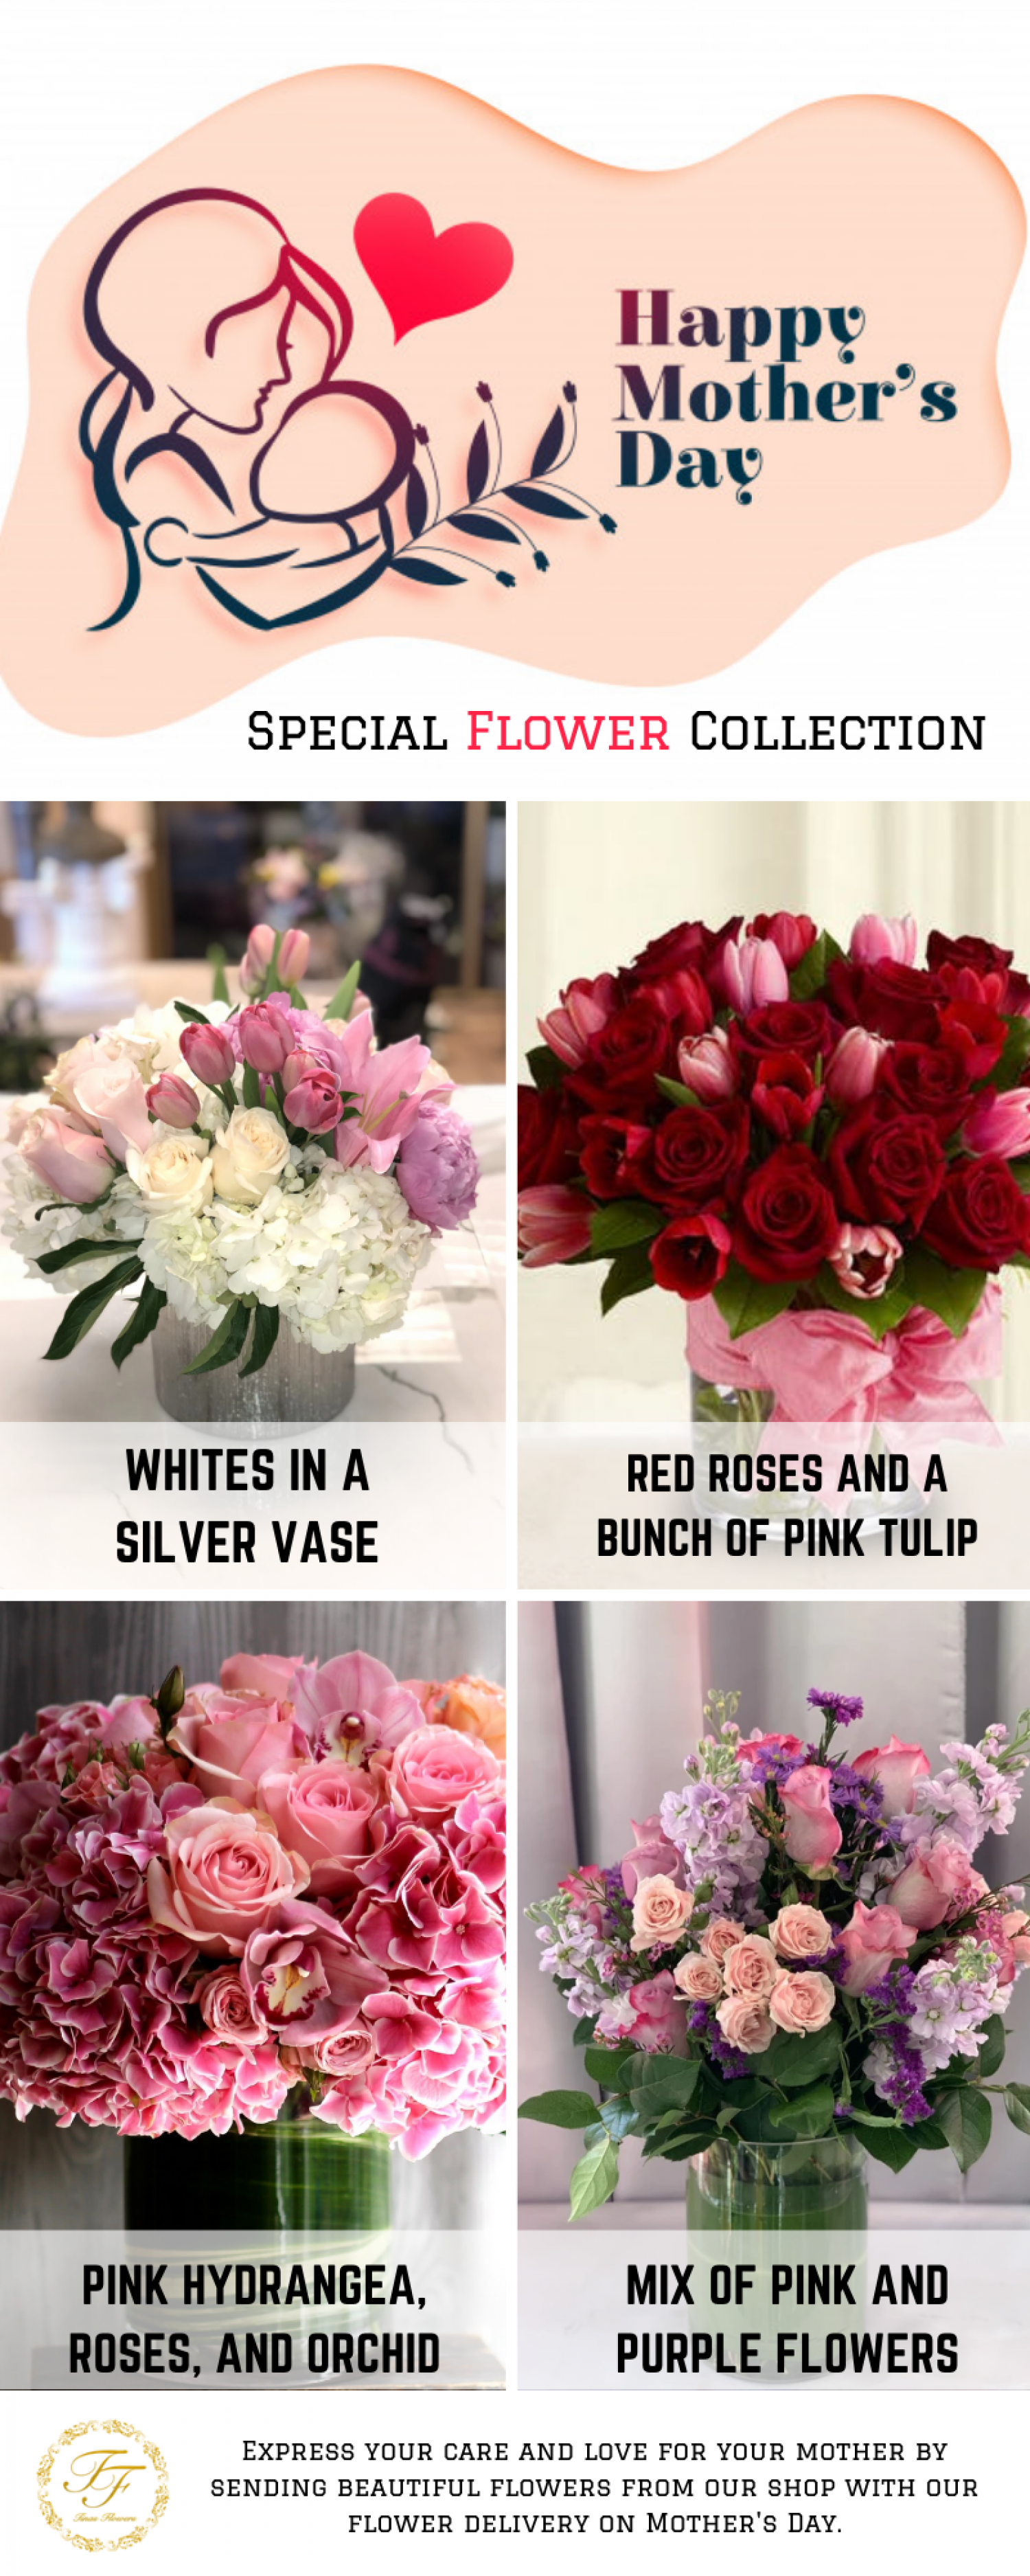 Send Mothers Day Special Flowers Online, Woodland Hills – Tinas Flowers and Gifts Infographic